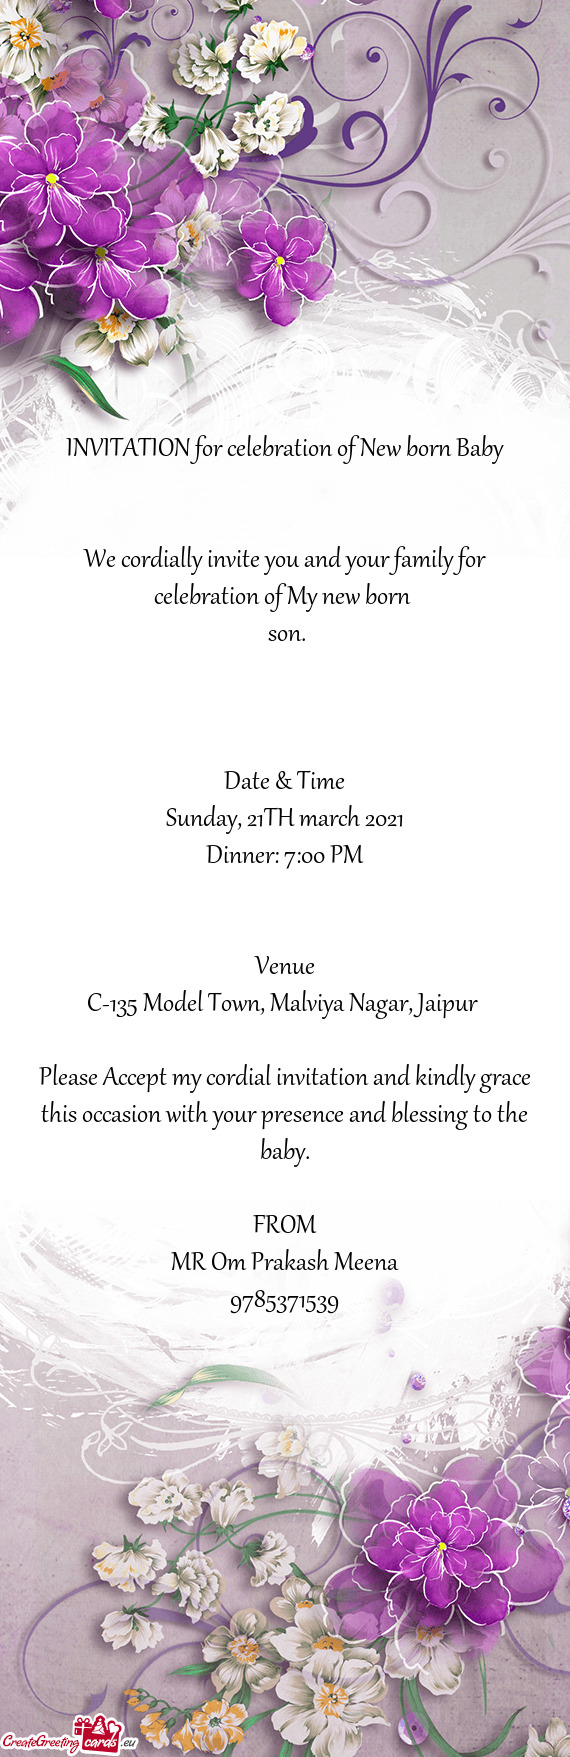 We cordially invite you and your family for celebration of My new born